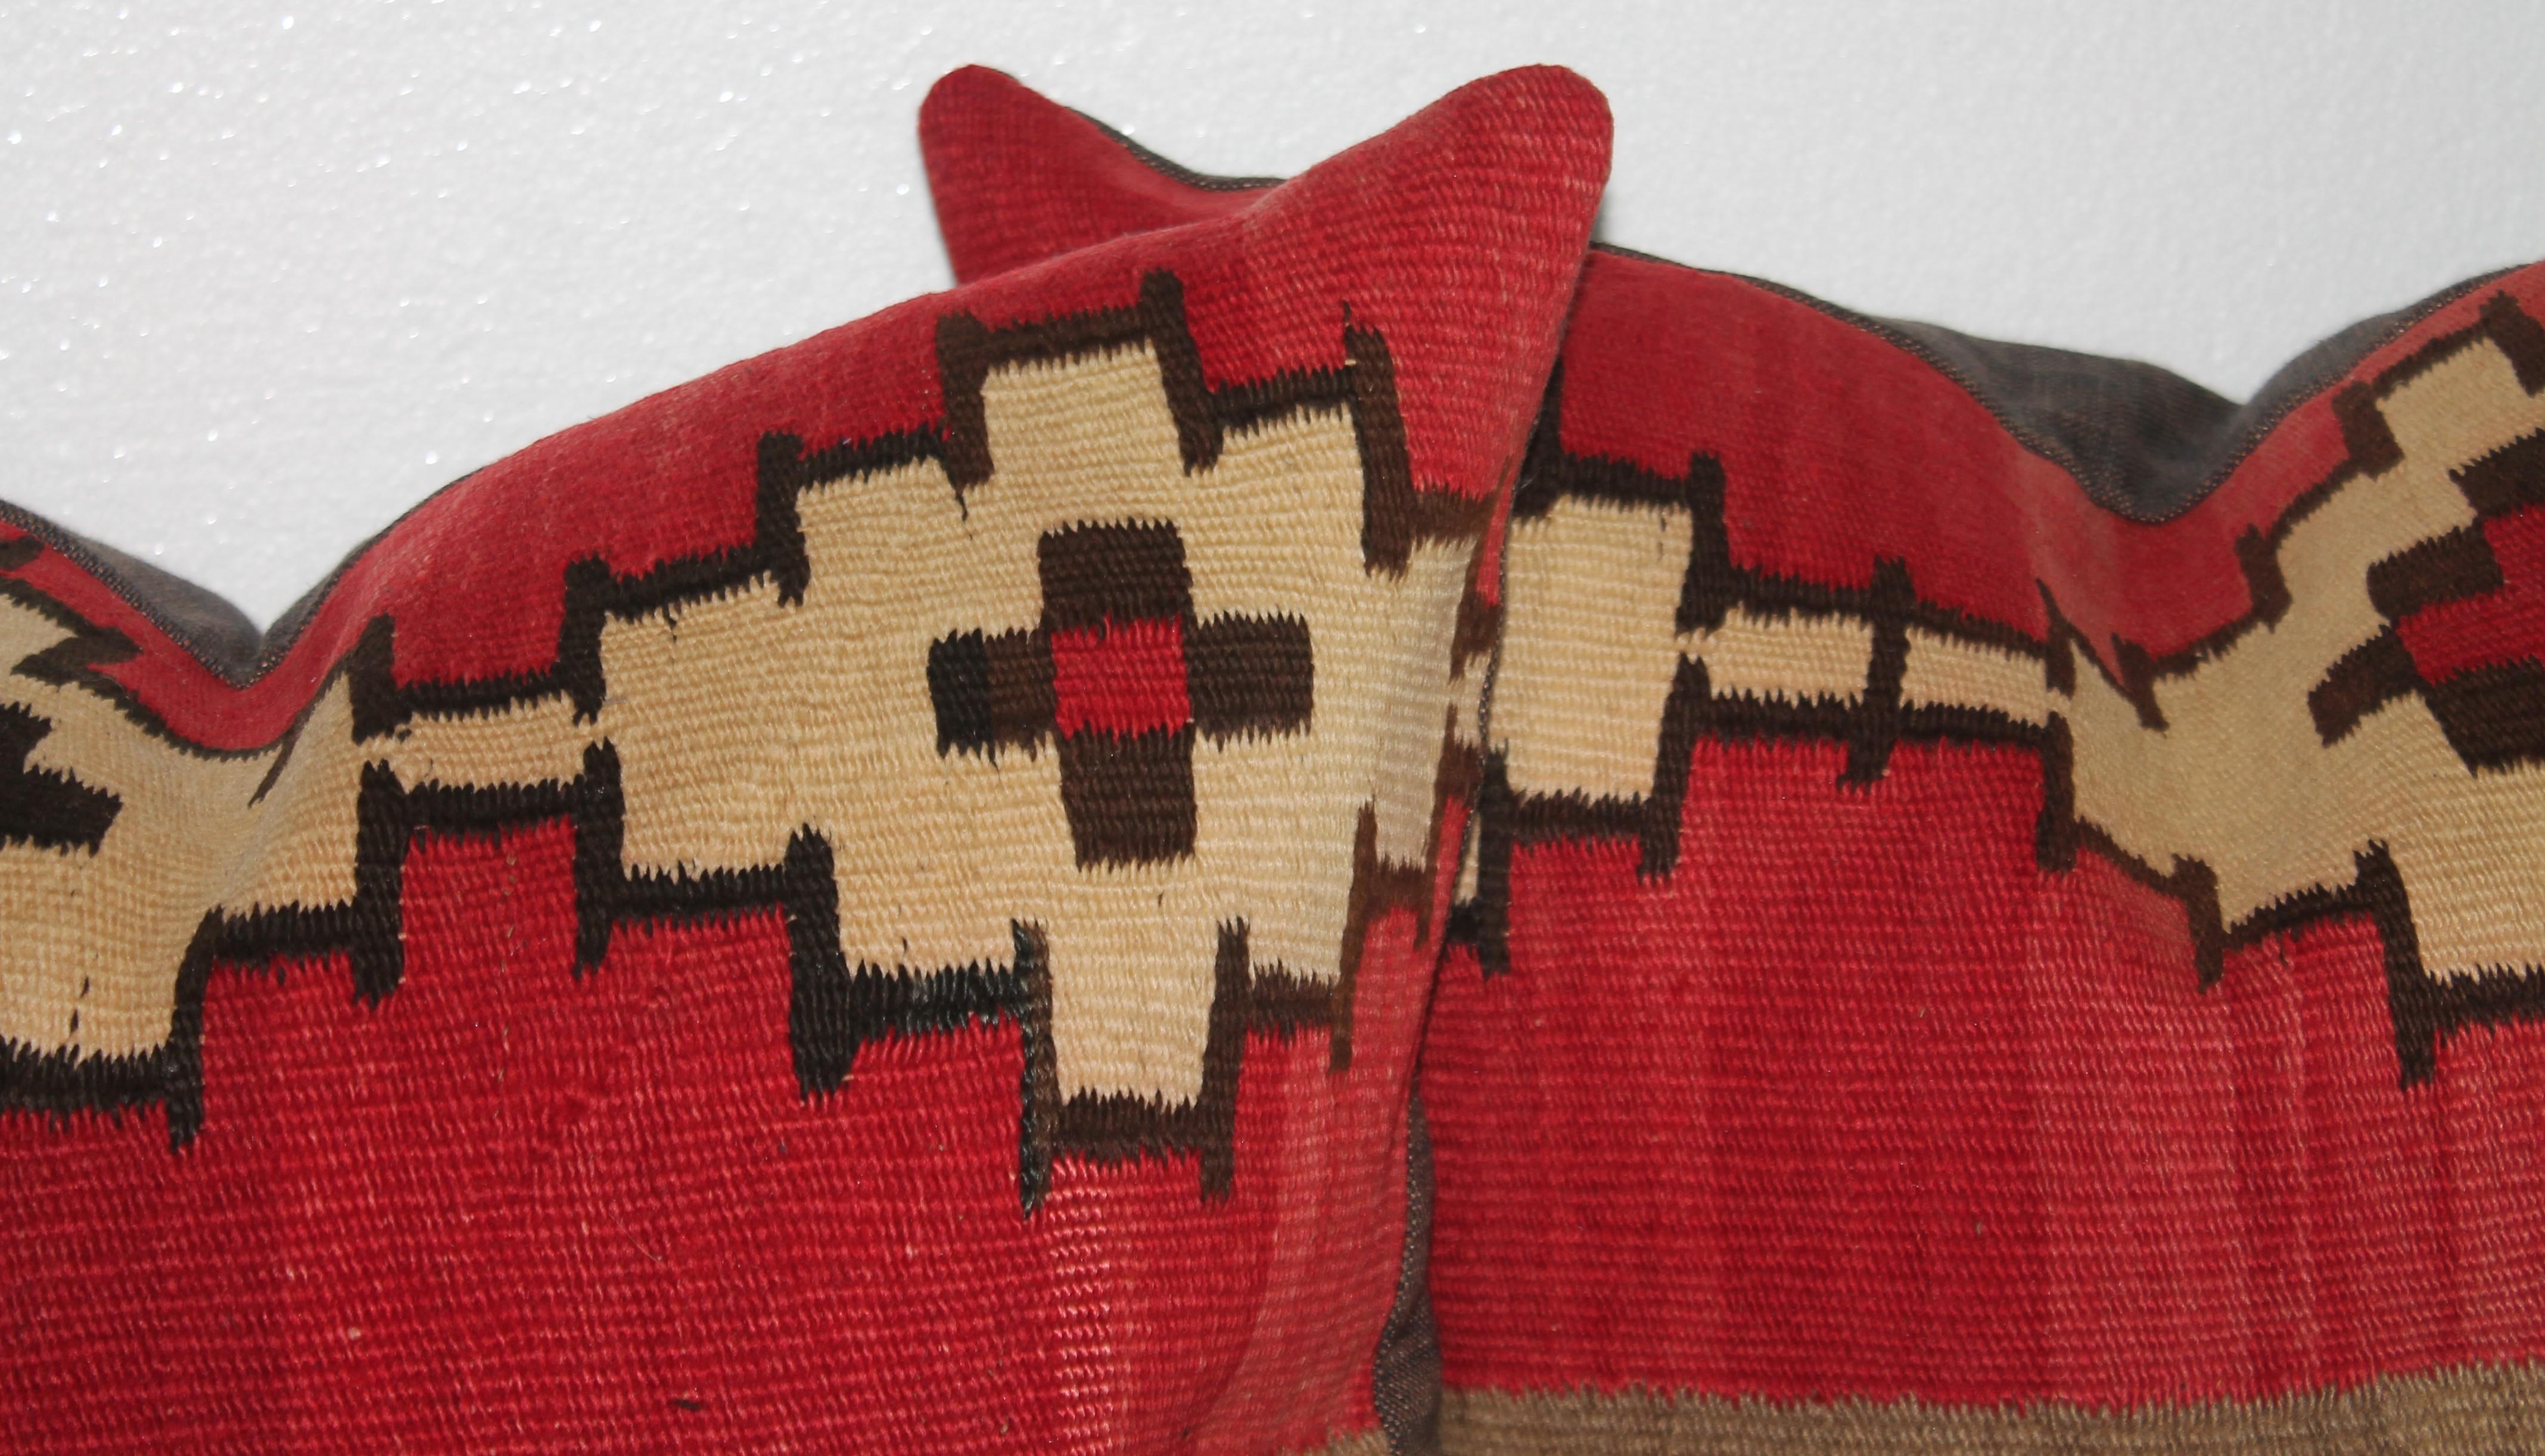 These Navajo Indian weaving pillows are fantastic colors and have wonderful rustic cotton linen backings. Sold as a pair or 950. each.